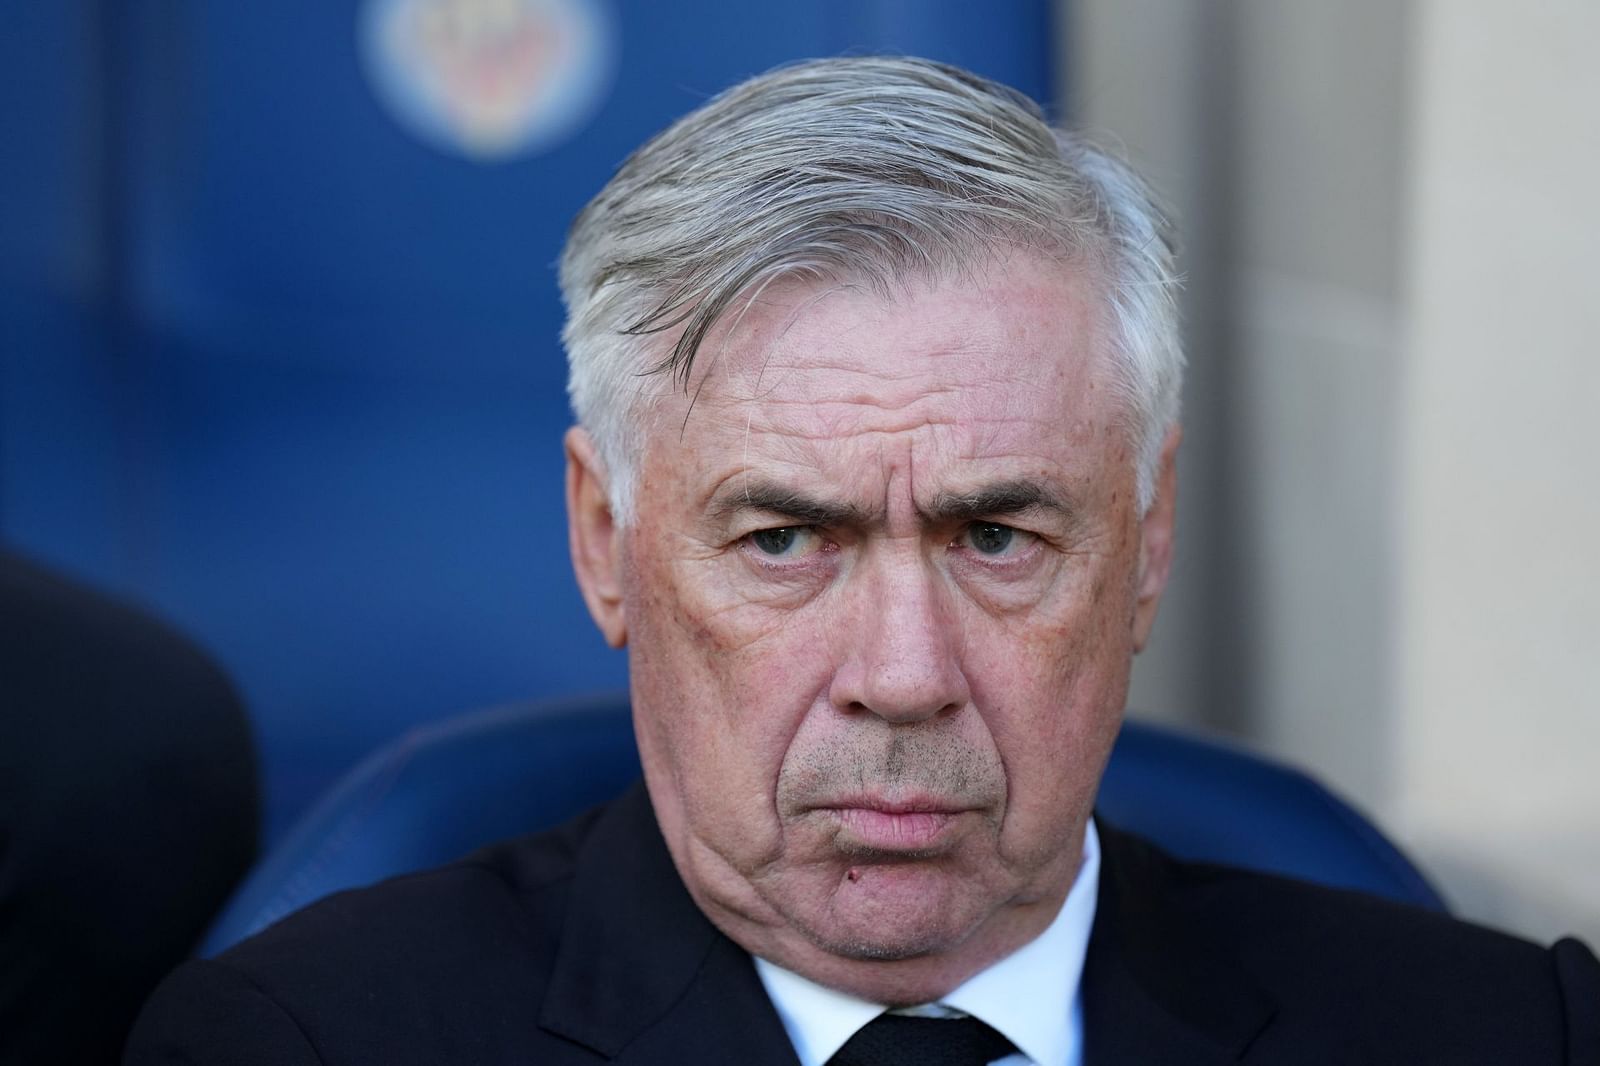 “maybe Because He Forgot” Carlo Ancelotti Reacts To Real Madrid Star Snubbing His Handshake 